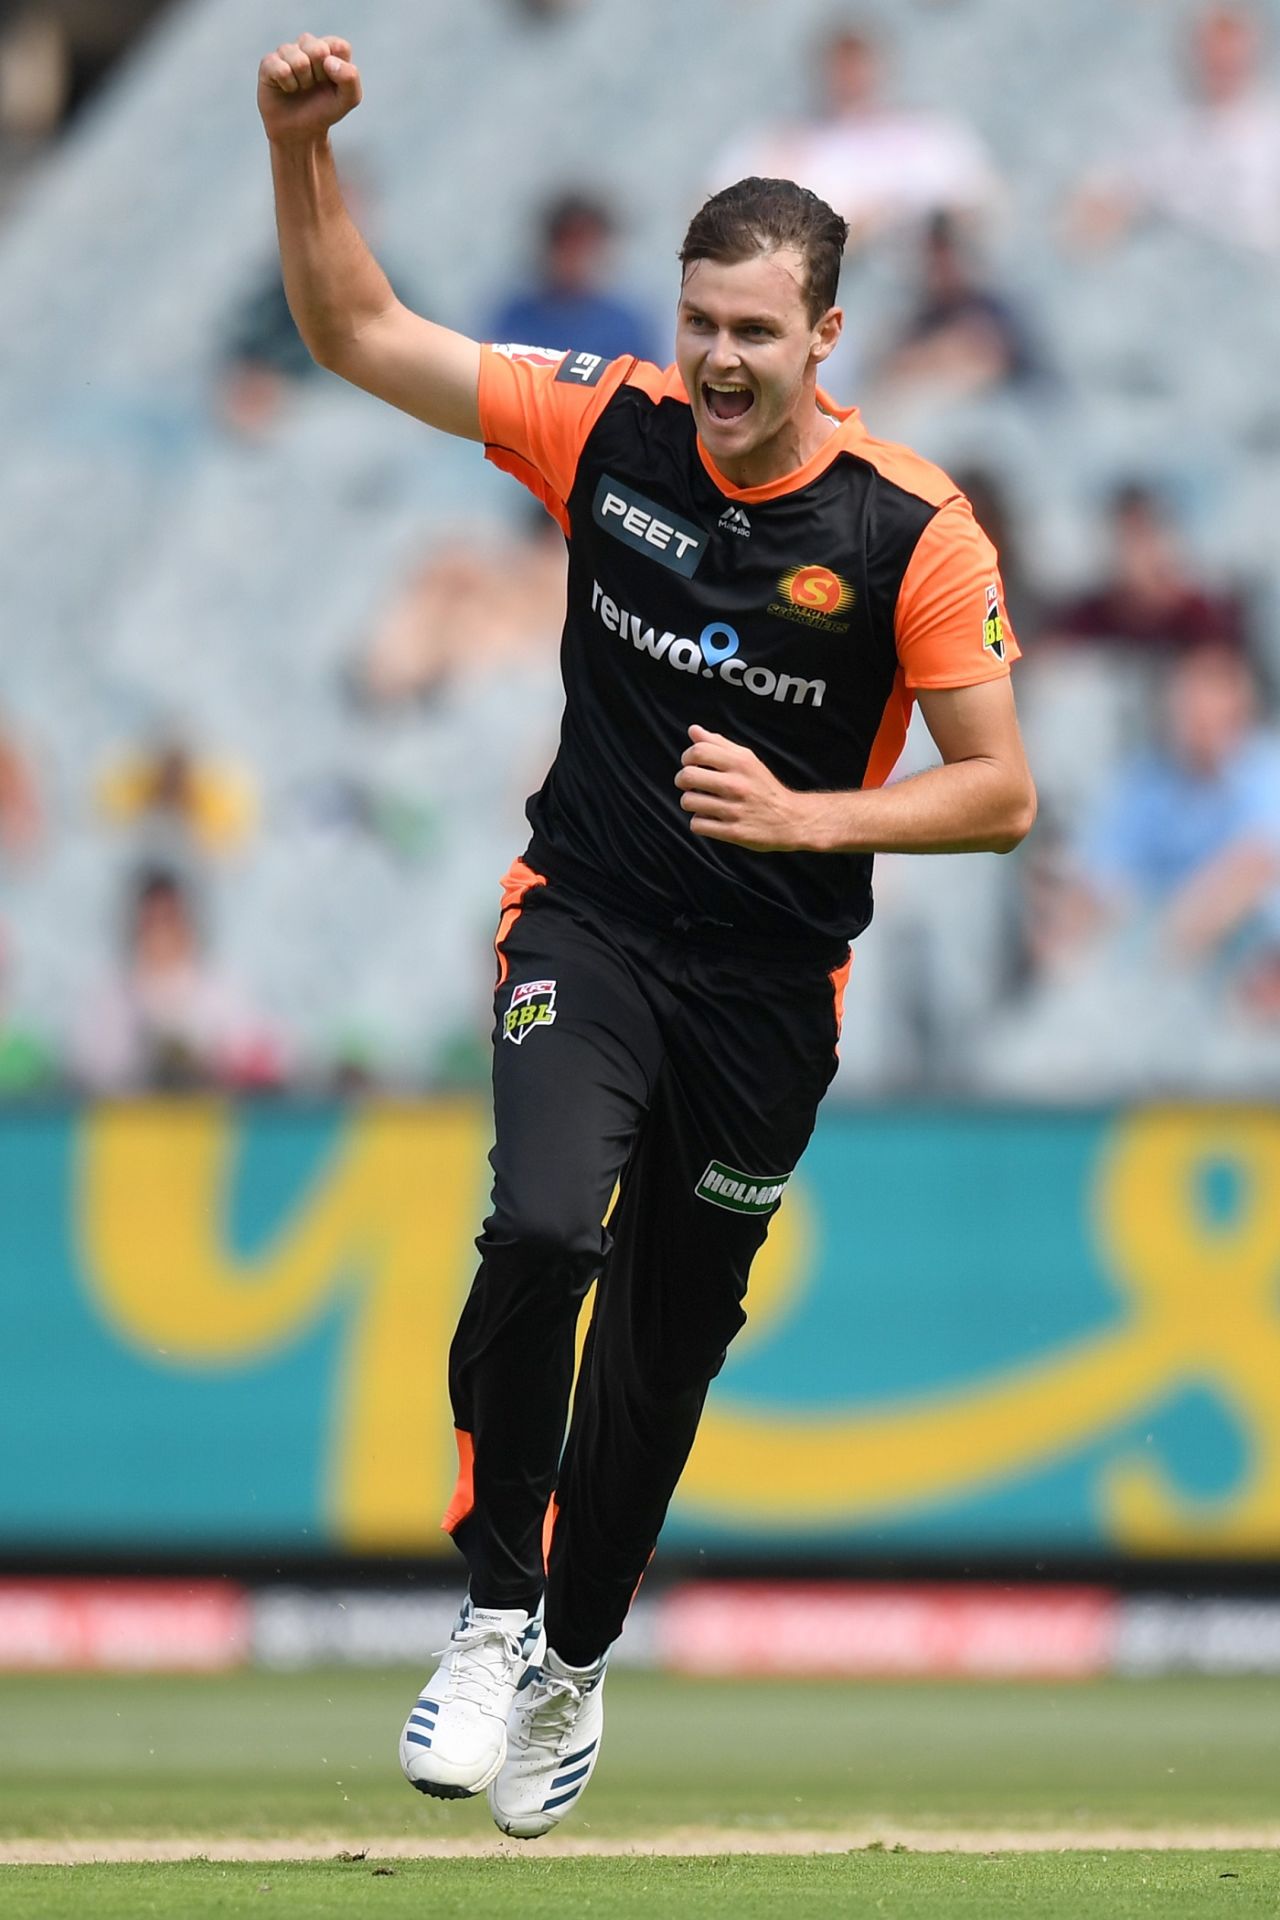 Matthew Kelly kept the Stars in check with regular strikes, Melbourne Stars v Perth Scorchers, BBL 2019-20, Melbourne, January 18, 2020